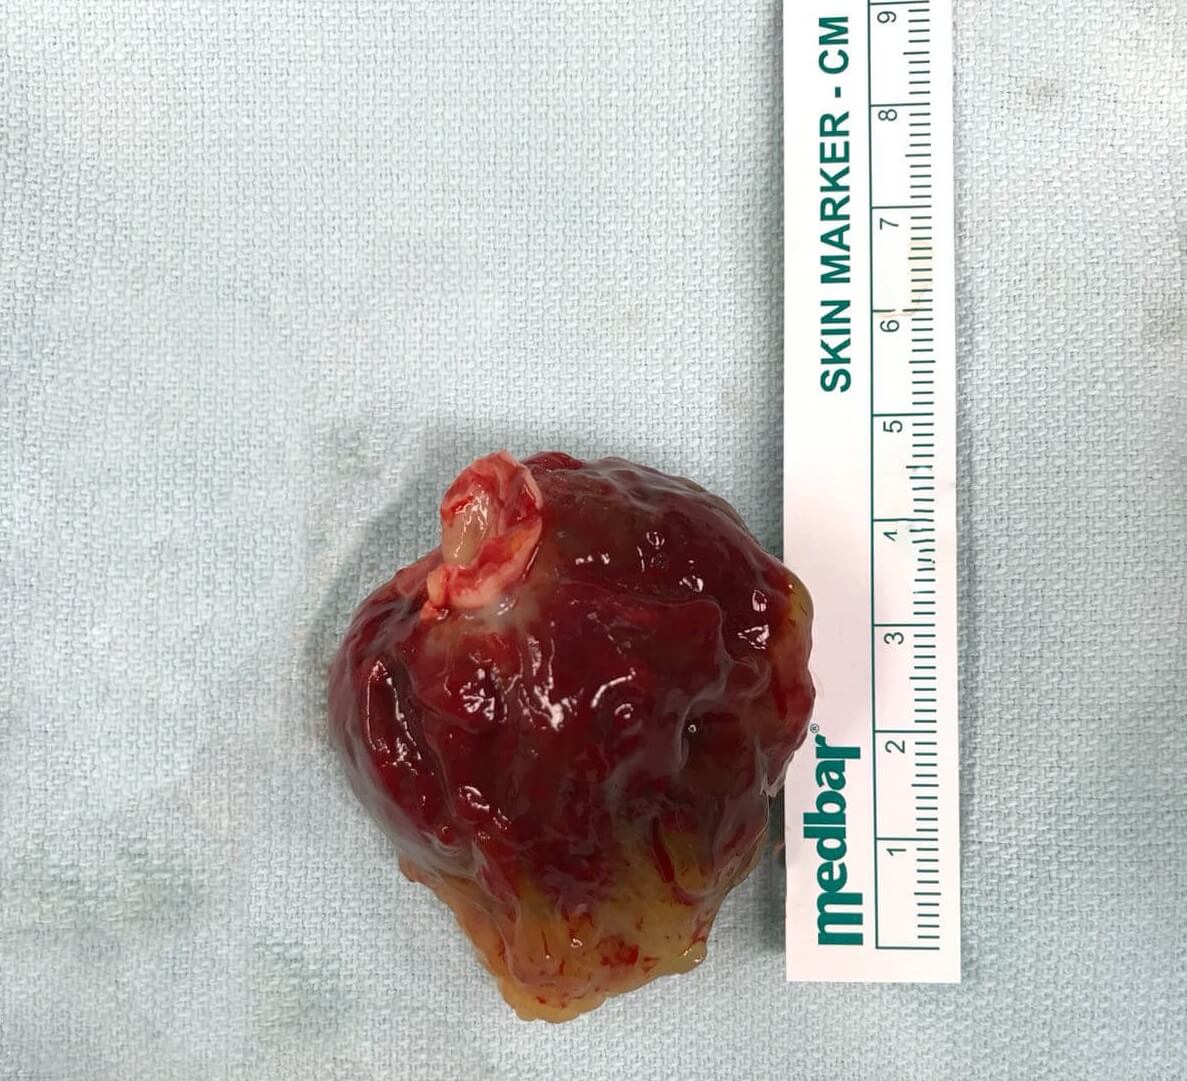 5 cm Tumor removed from Heart